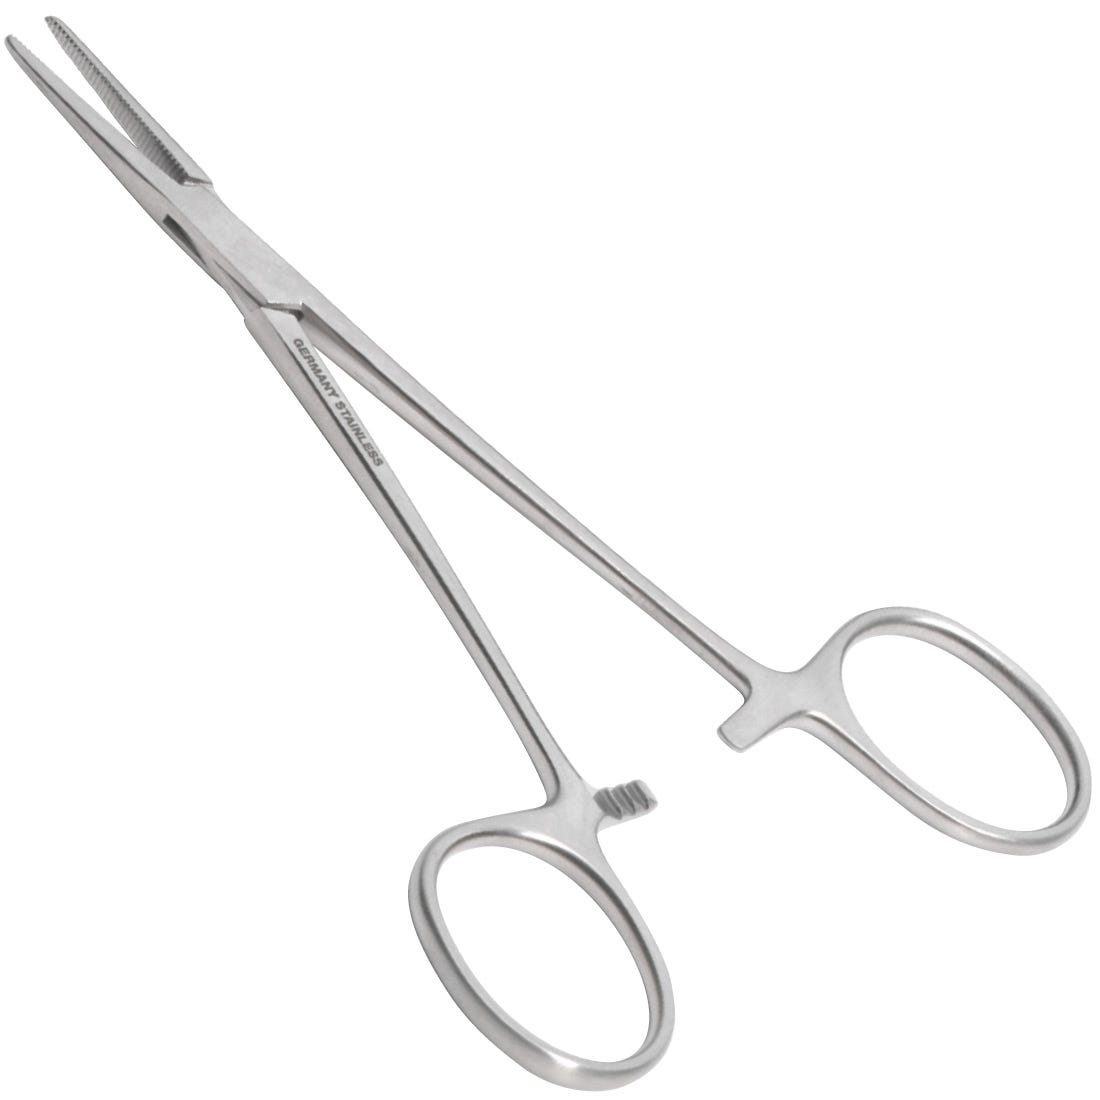 ACE Halsted Mosquito Forcep #4, straight, 4-3/4", 12cm